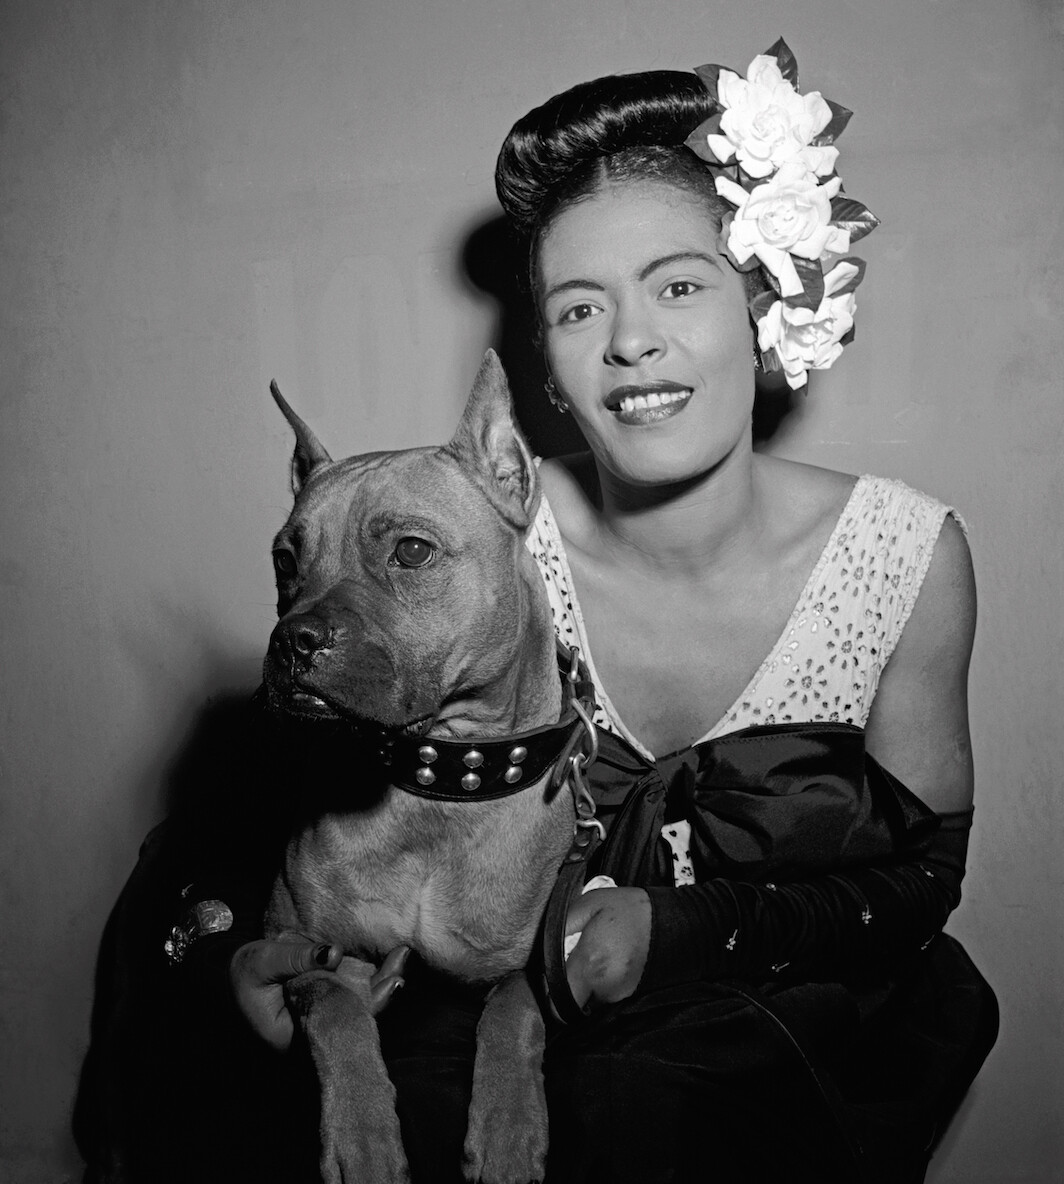 Billie Holiday with her dog Mister, Downbeat Club, New York, NY, February 1947. Photo: Library of Congress/William P. Gottlieb.